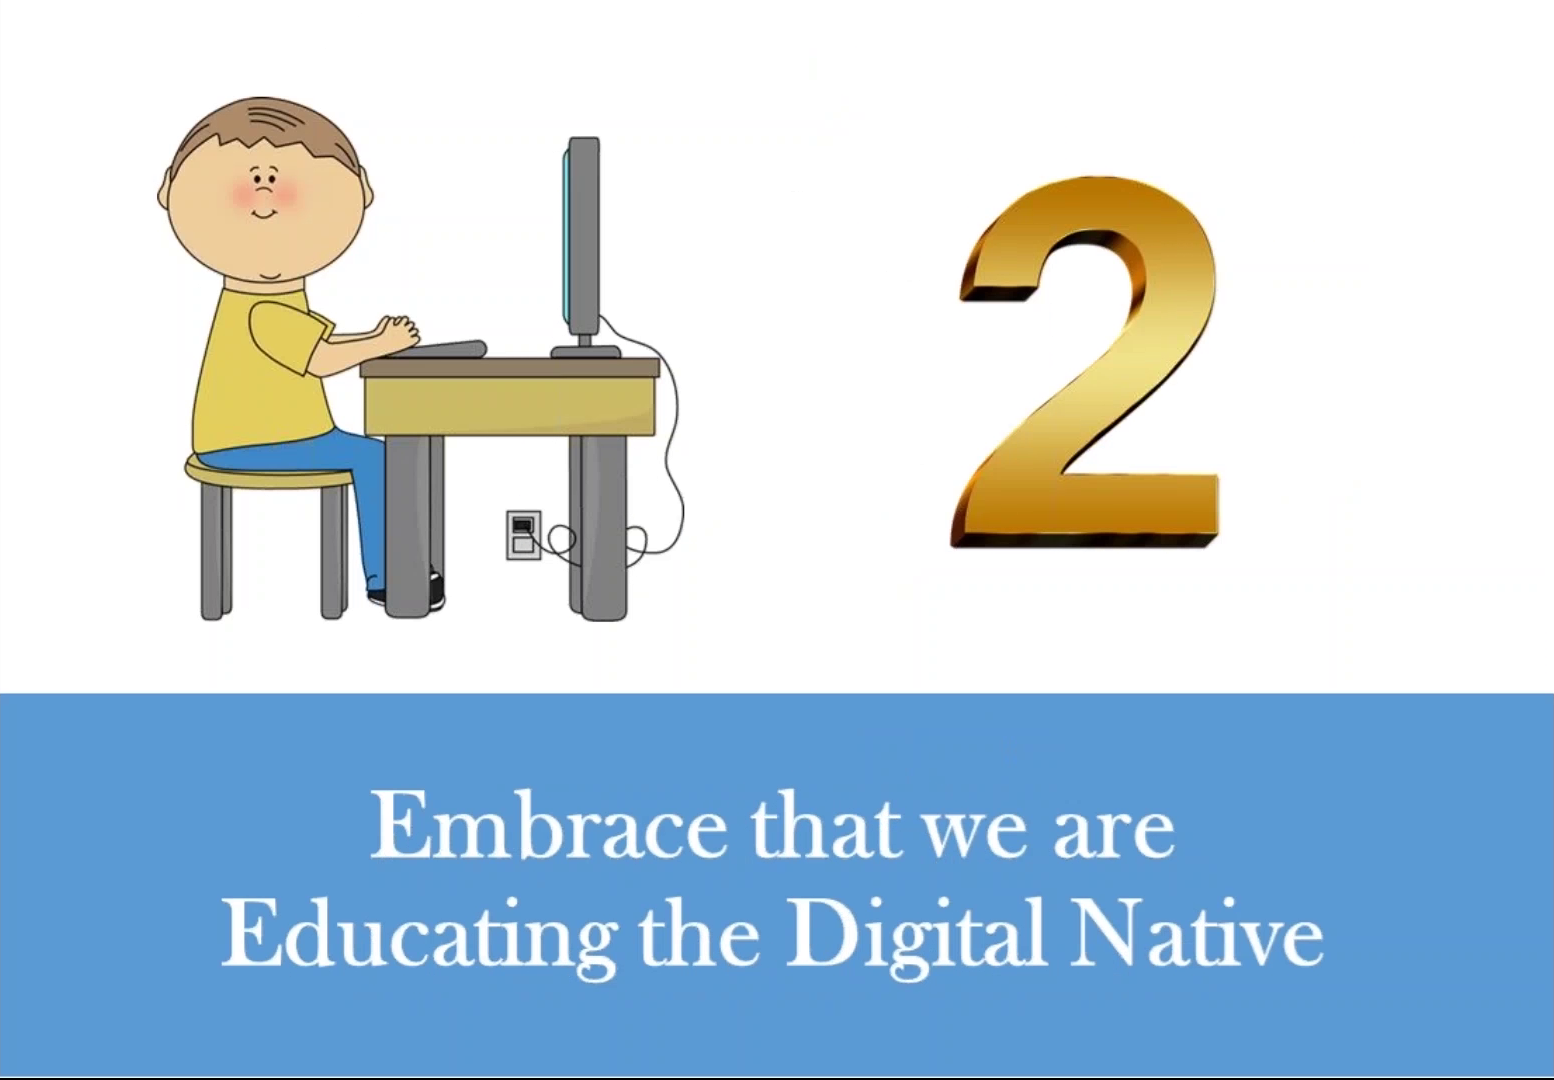 Embrace that we are Educating the Digital Native